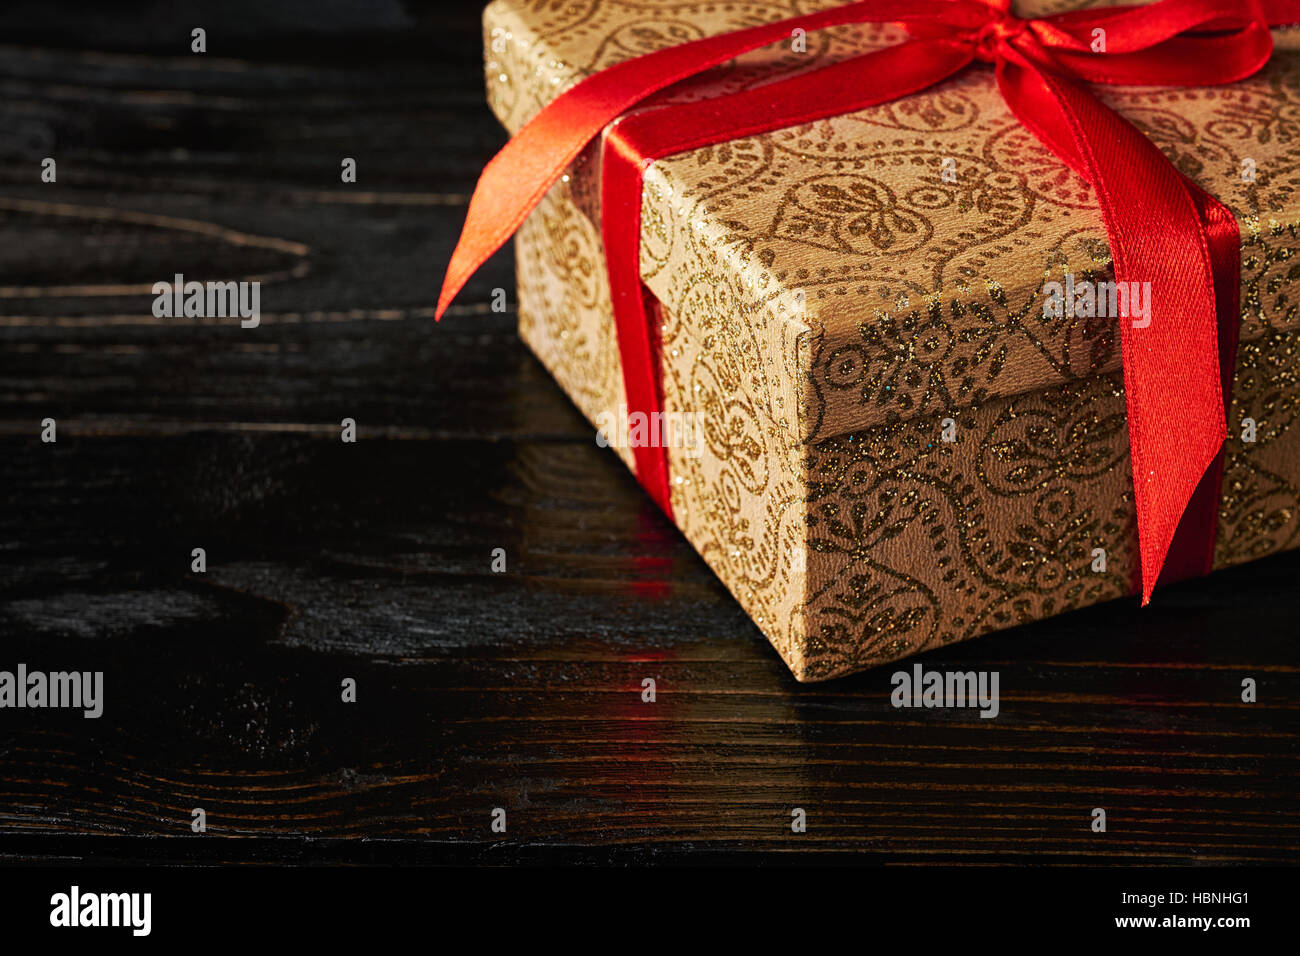 Gift box with red ribbon Stock Photo